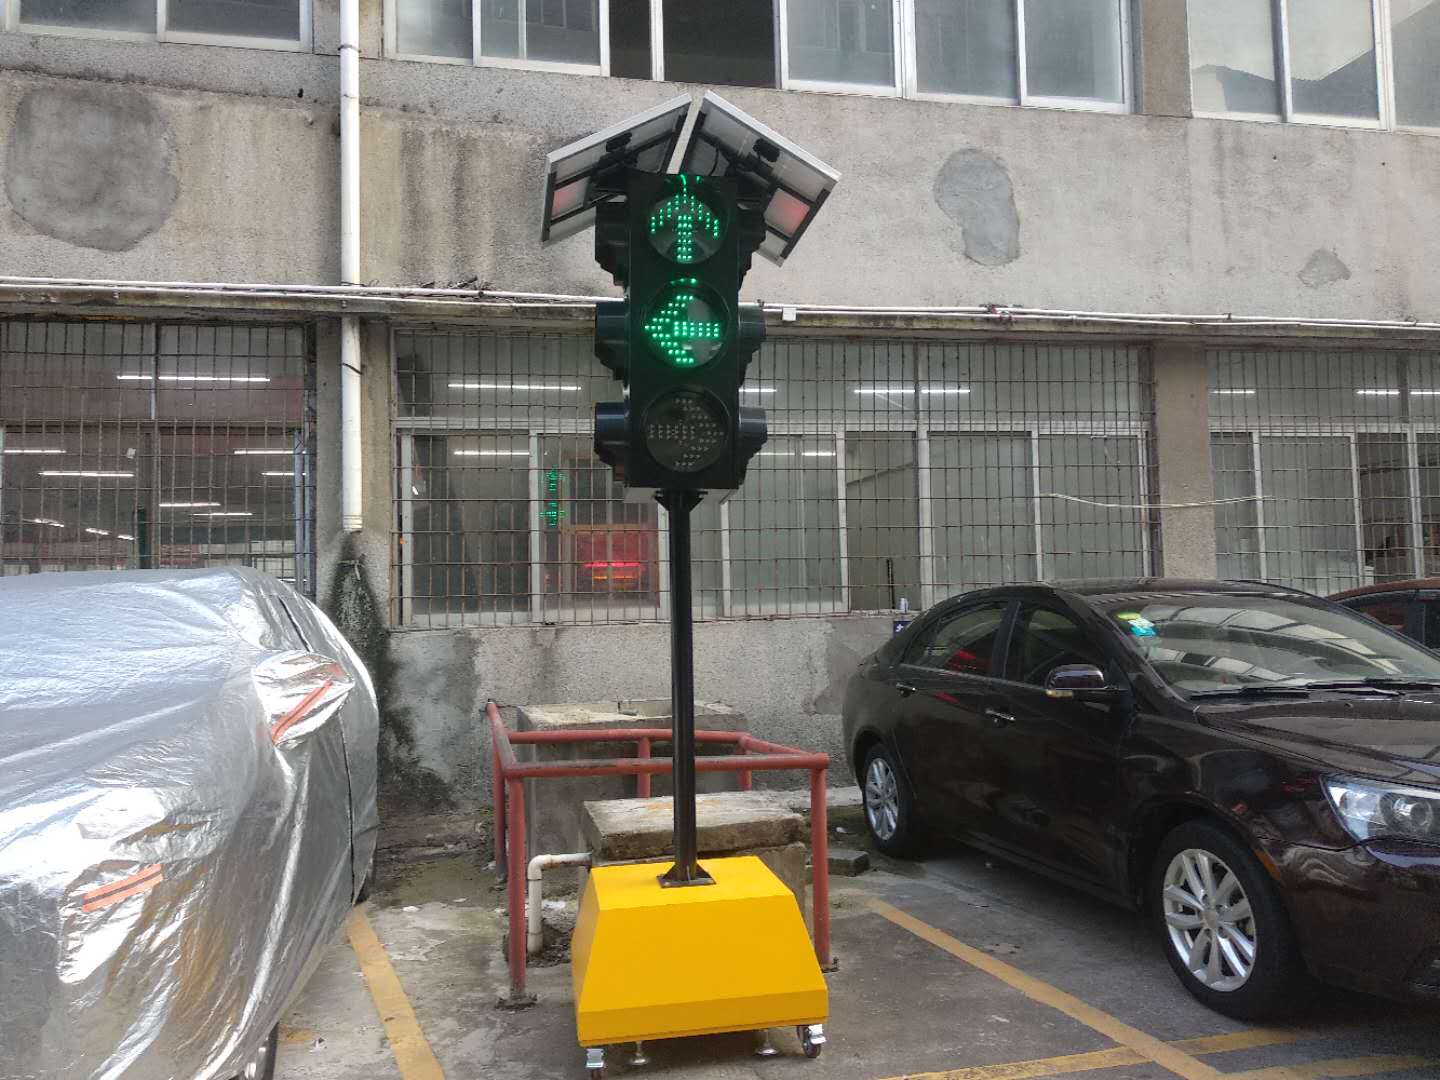 What are the working modes of the solar tri-color portable arrow traffic lights?